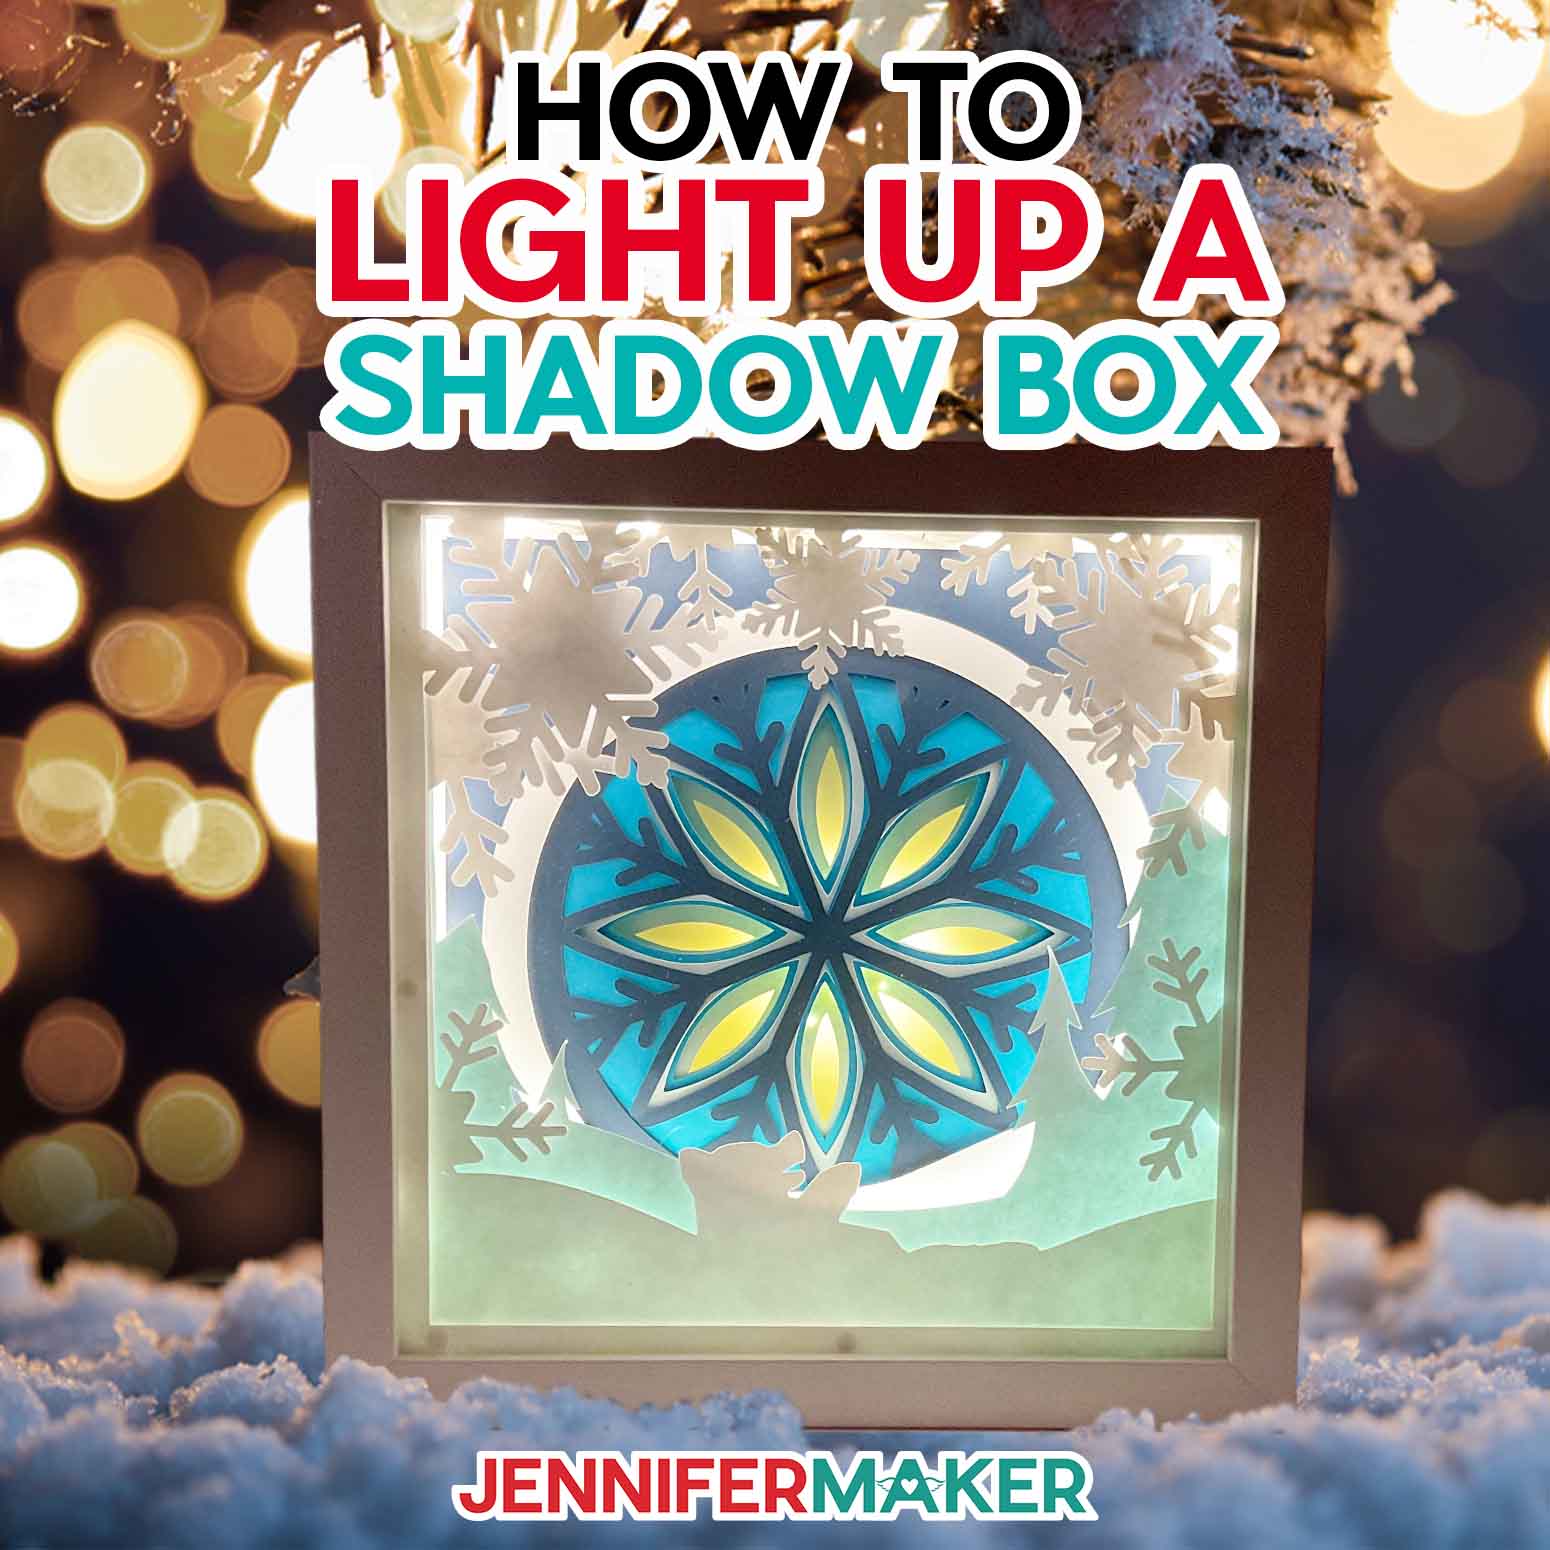 Snowflake and bear lighted shadow box tutorial preview.